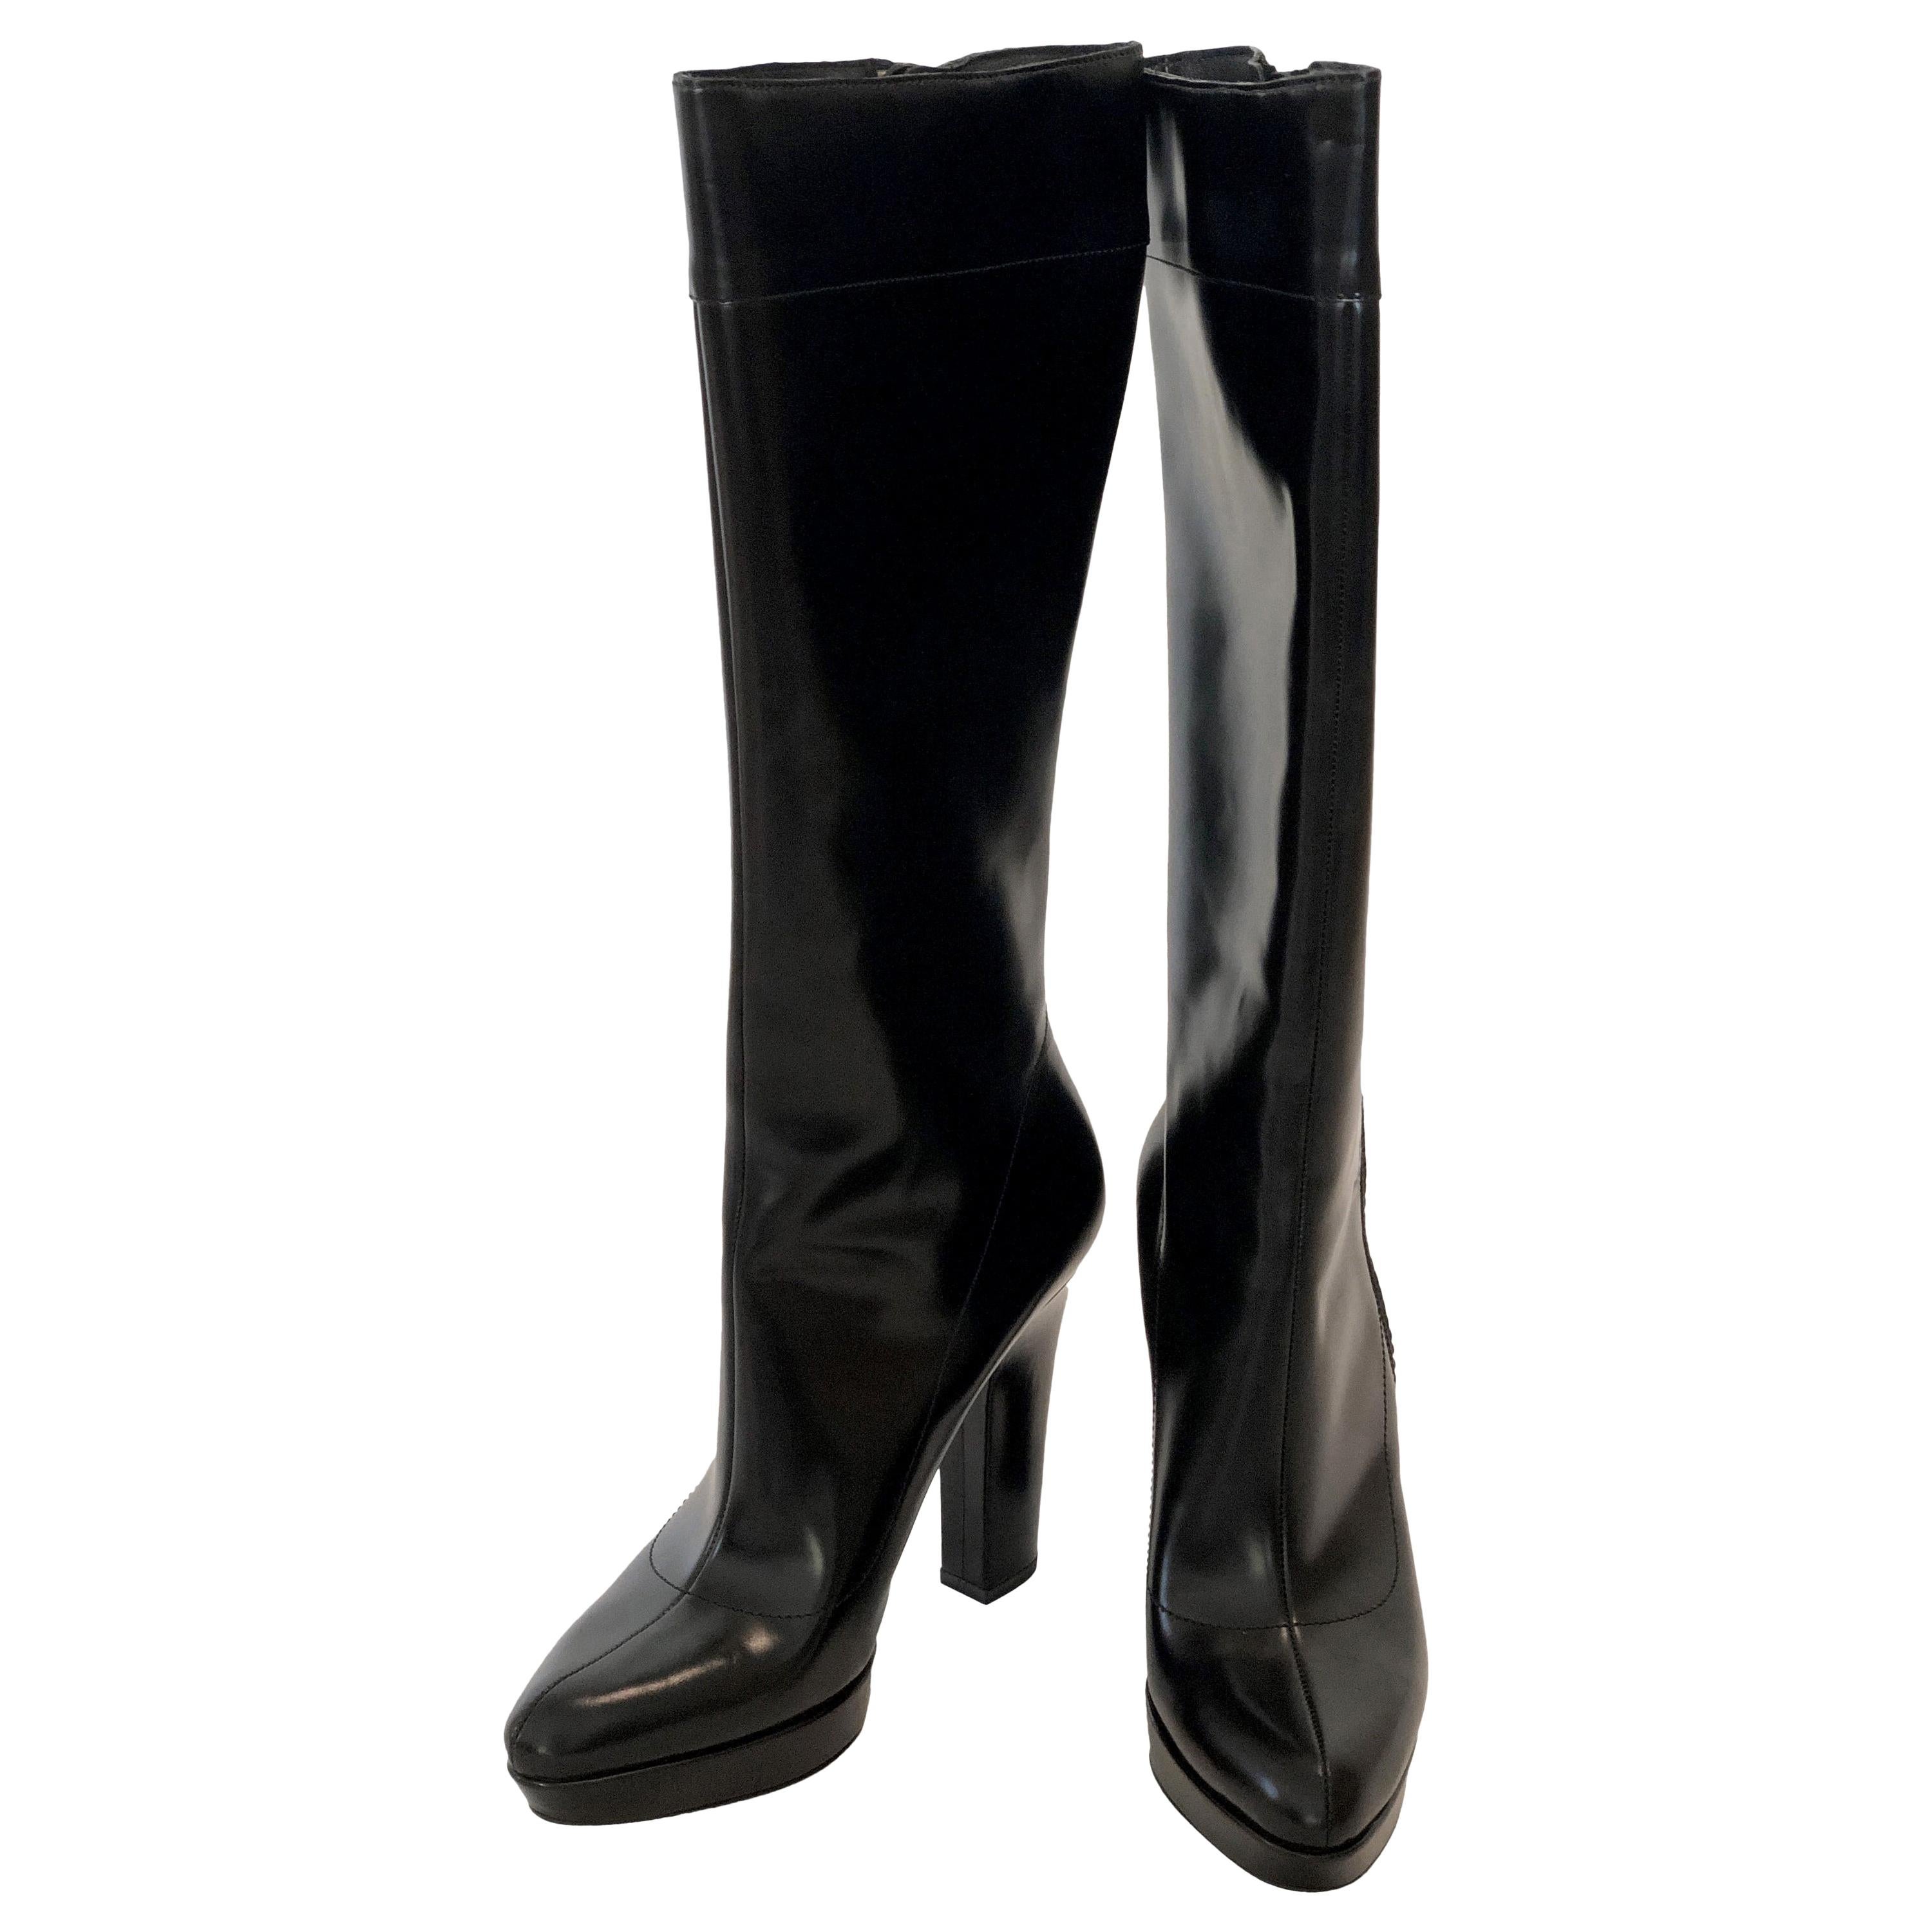 Pair of Gucci Shiny Black Side Zip Pointy Toe Platform and Heeled Knee Boots For Sale